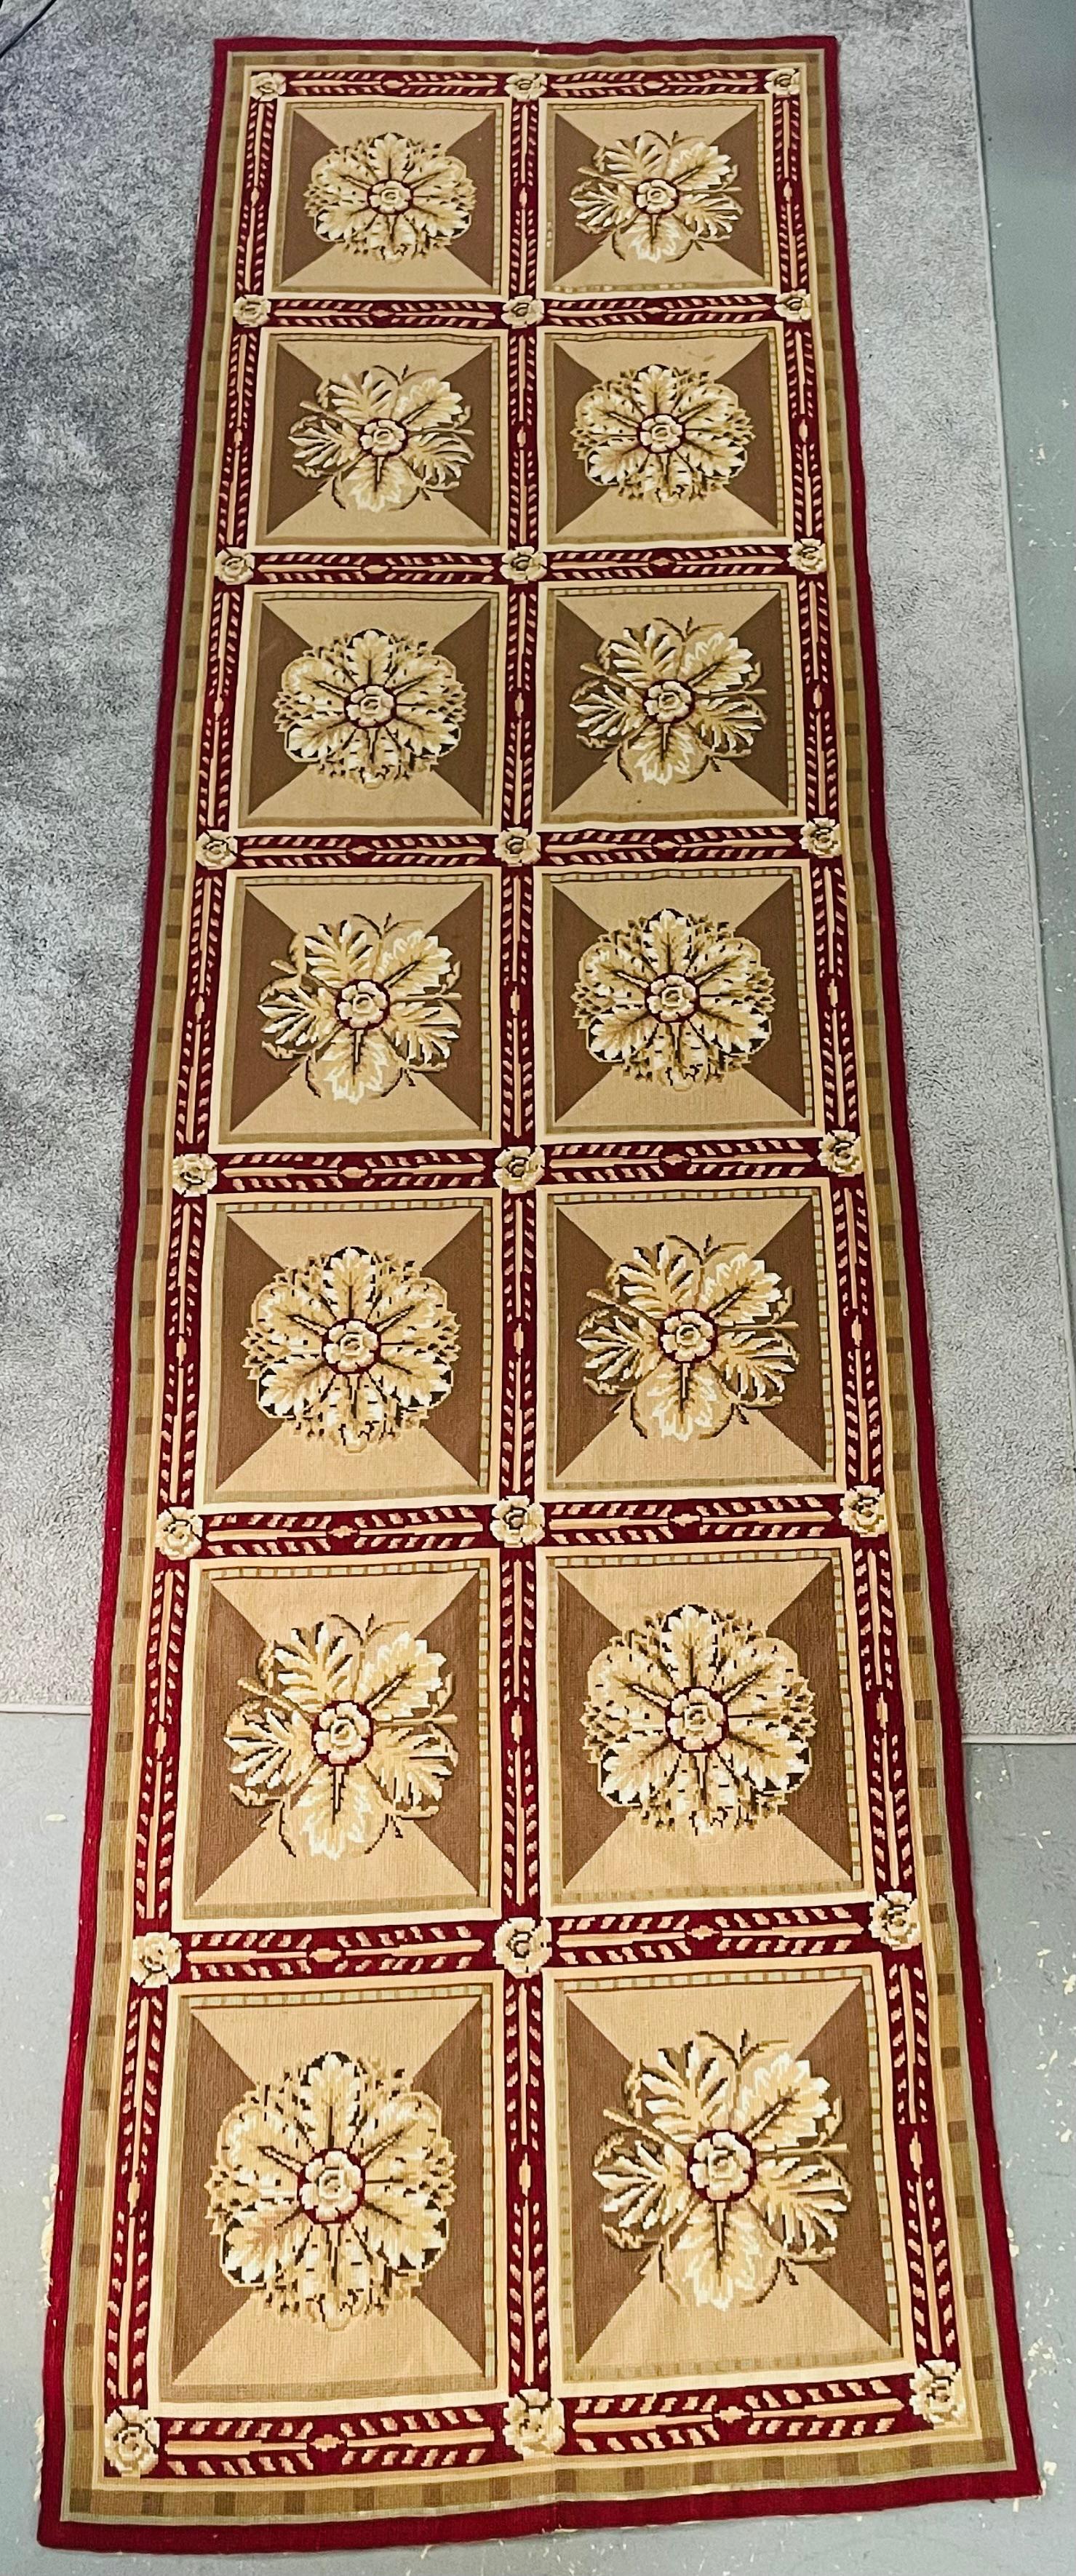 An antique French Handwoven needlepoint tapestry or runner featuring a French geometrical patchwork design with a multi-colored background and border, accented with shades of olive, ivory and crimson colors. The elegant tapestry runner will elevate